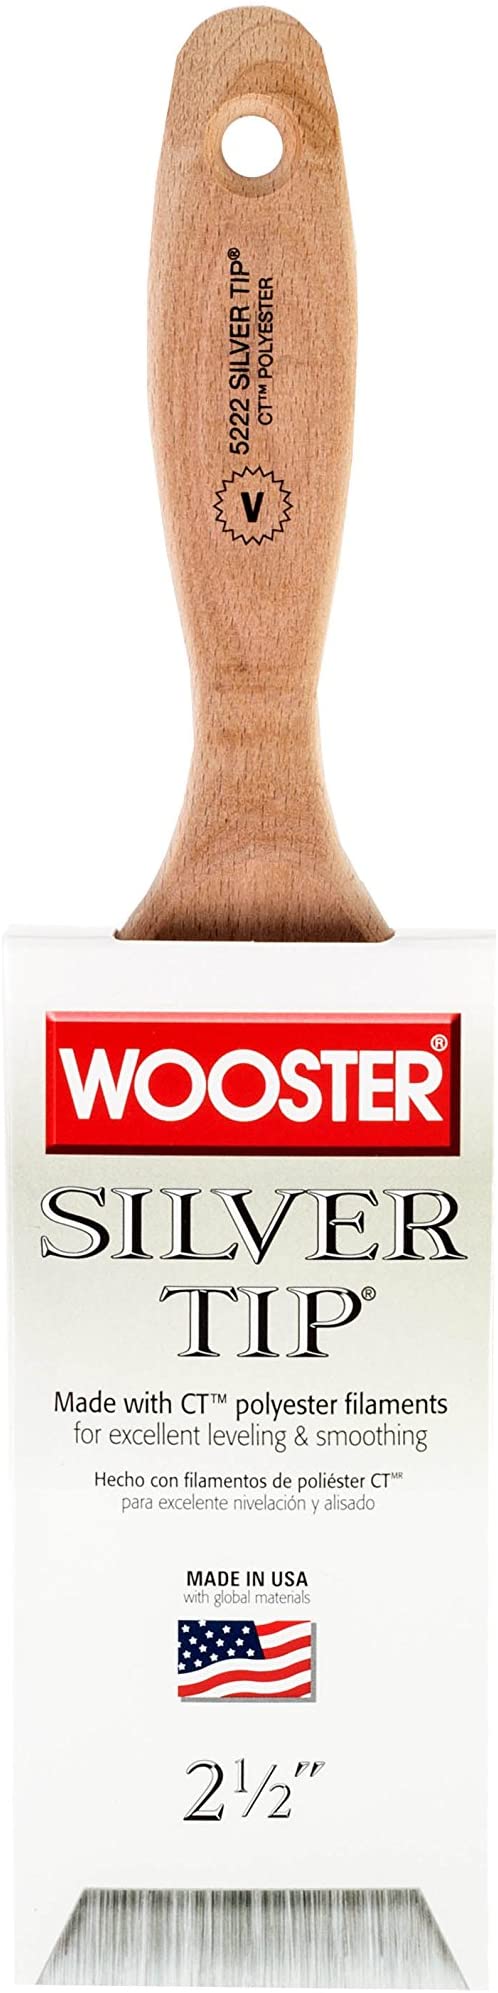 Wooster Brush 5222-2 1/2 Silver Tip Paintbrush, 2-1/2-Inch